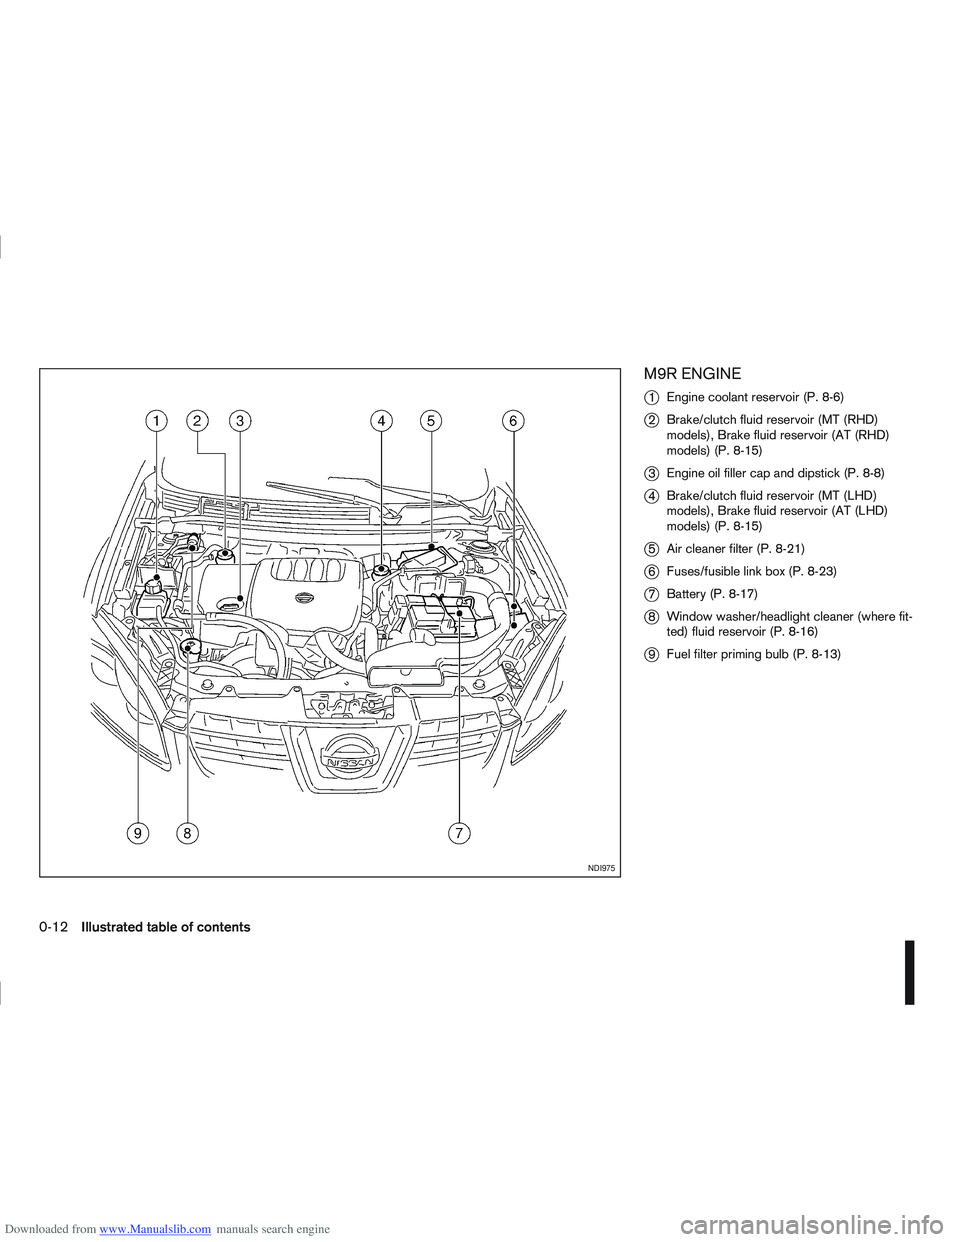 NISSAN QASHQAI 2012  Owners Manual Downloaded from www.Manualslib.com manuals search engine M9R ENGINE
j
1Engine coolant reservoir (P. 8-6)
j2Brake/clutch fluid reservoir (MT (RHD)
models), Brake fluid reservoir (AT (RHD)
models) (P. 8